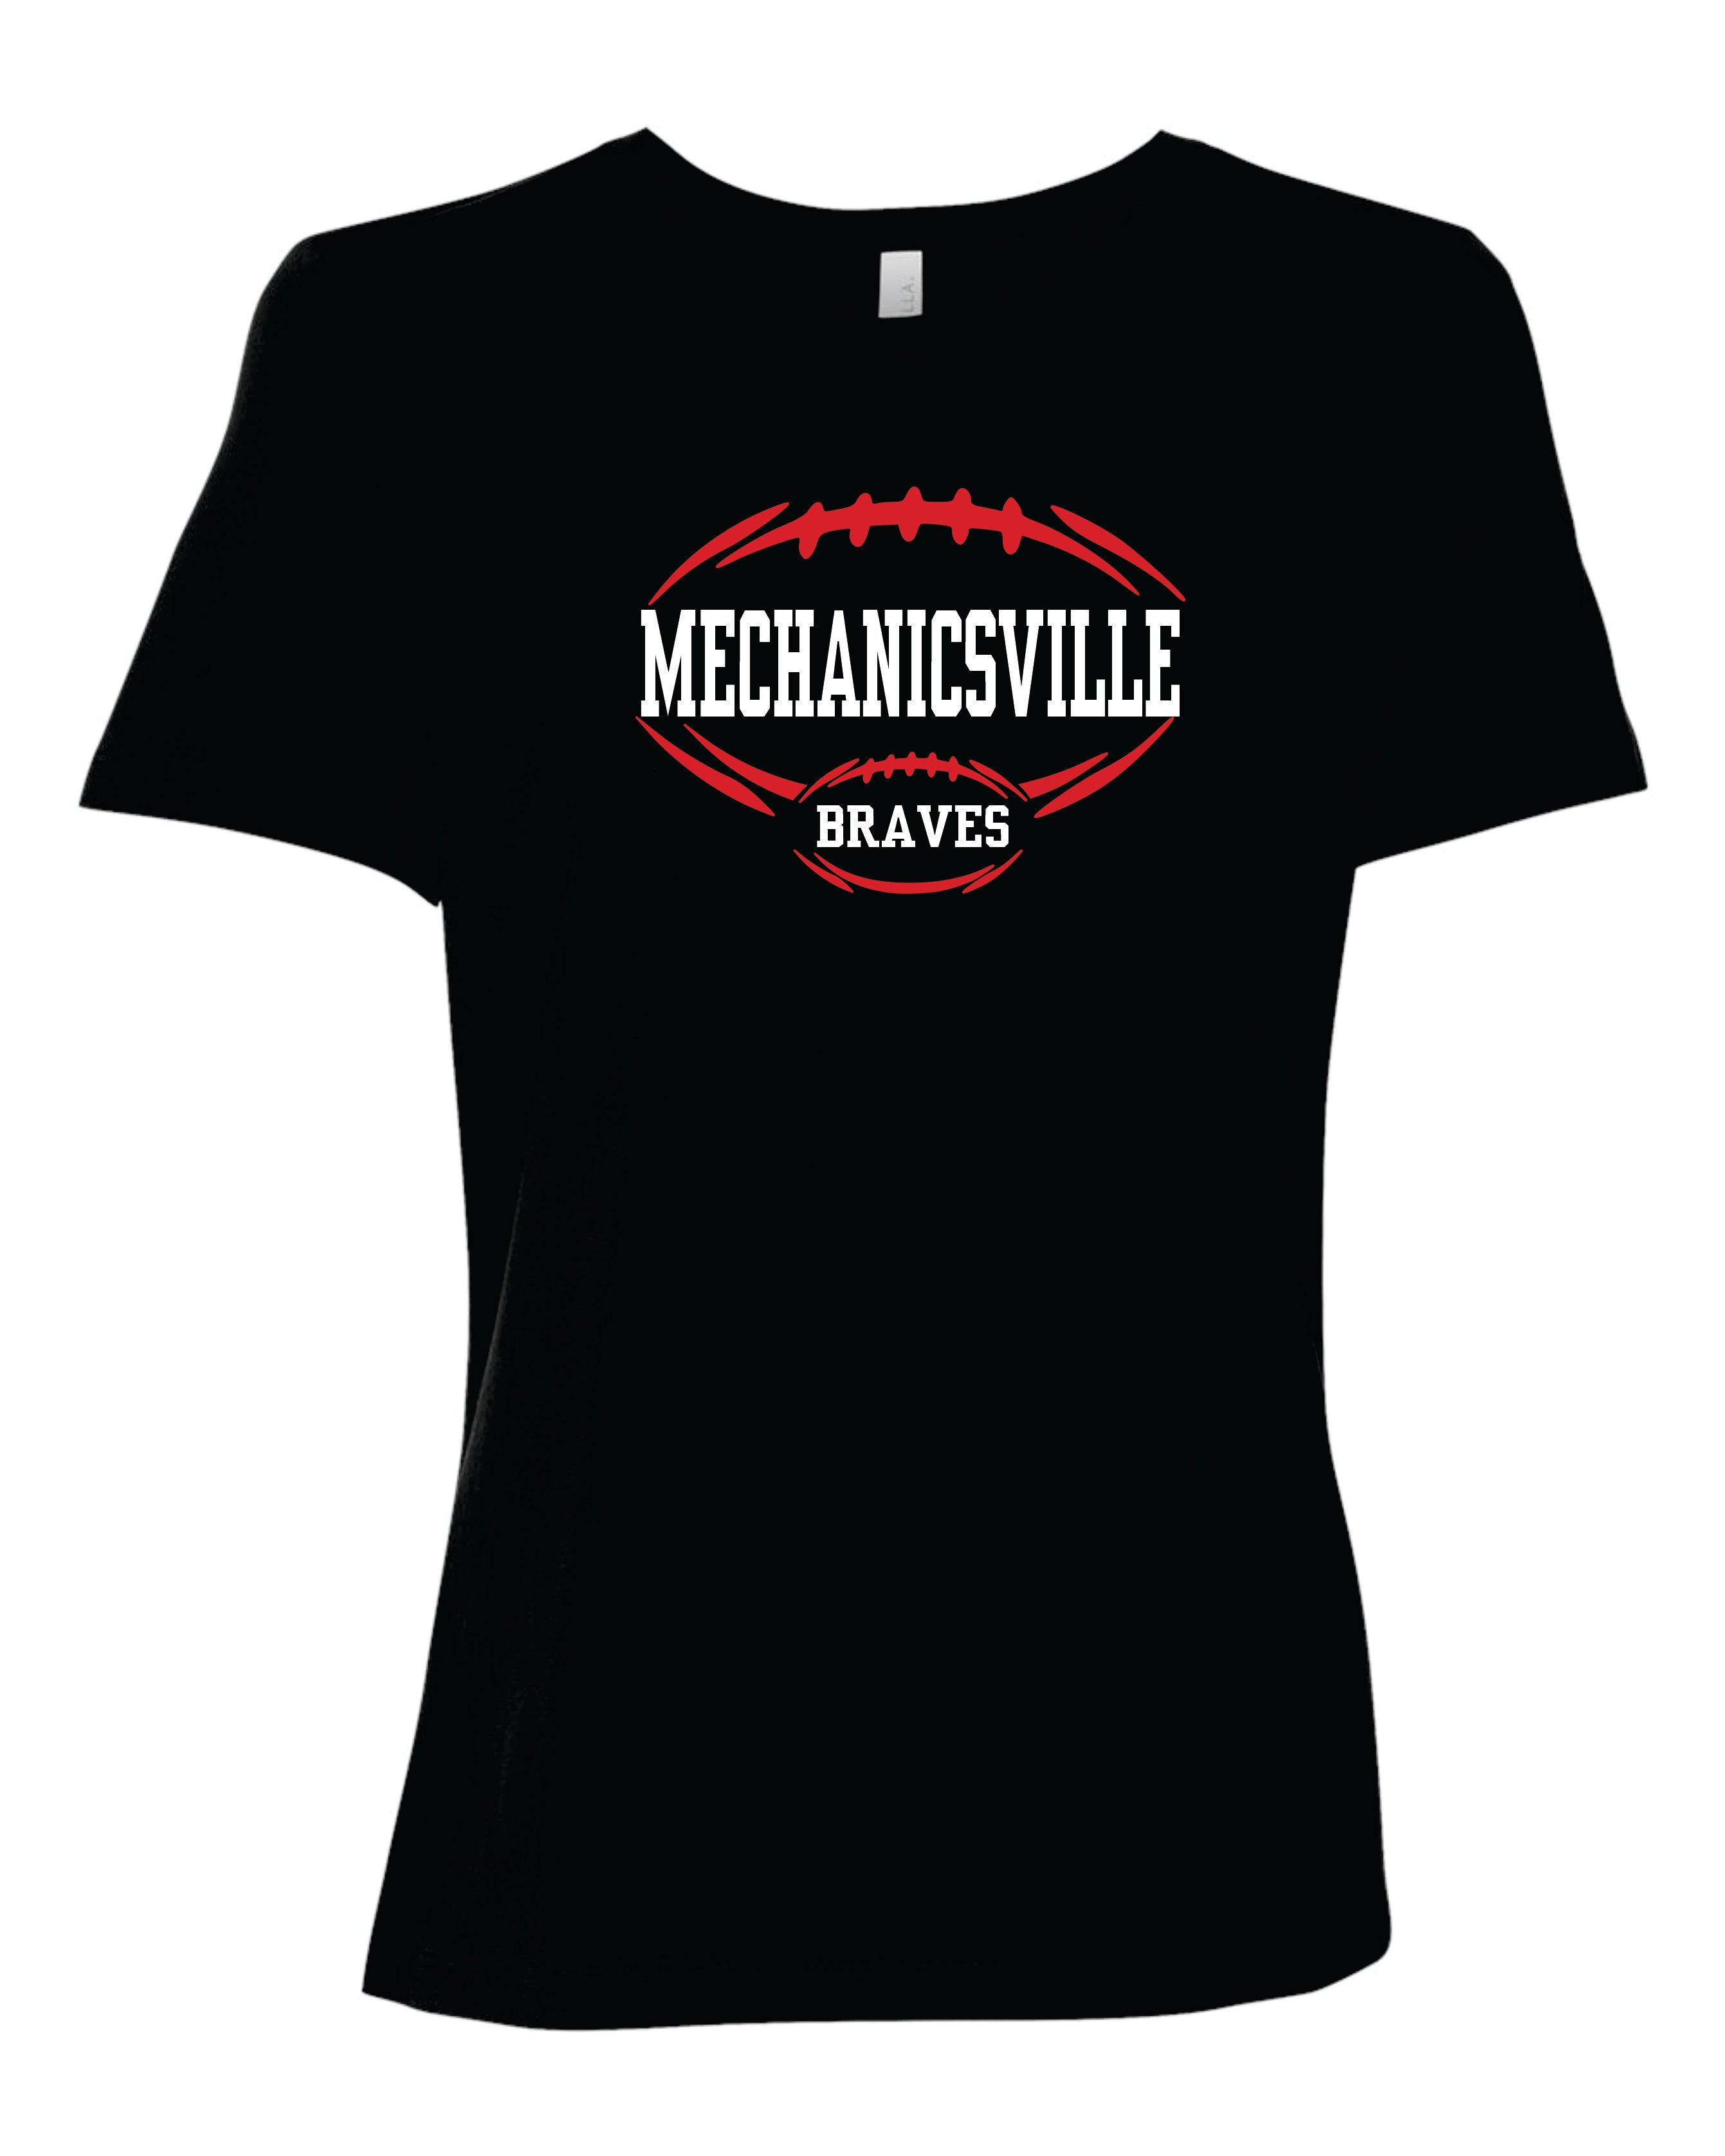 Mechanicsville Braves Women's Bella and Canvas Short Sleeve Relaxed Fit Round Neck